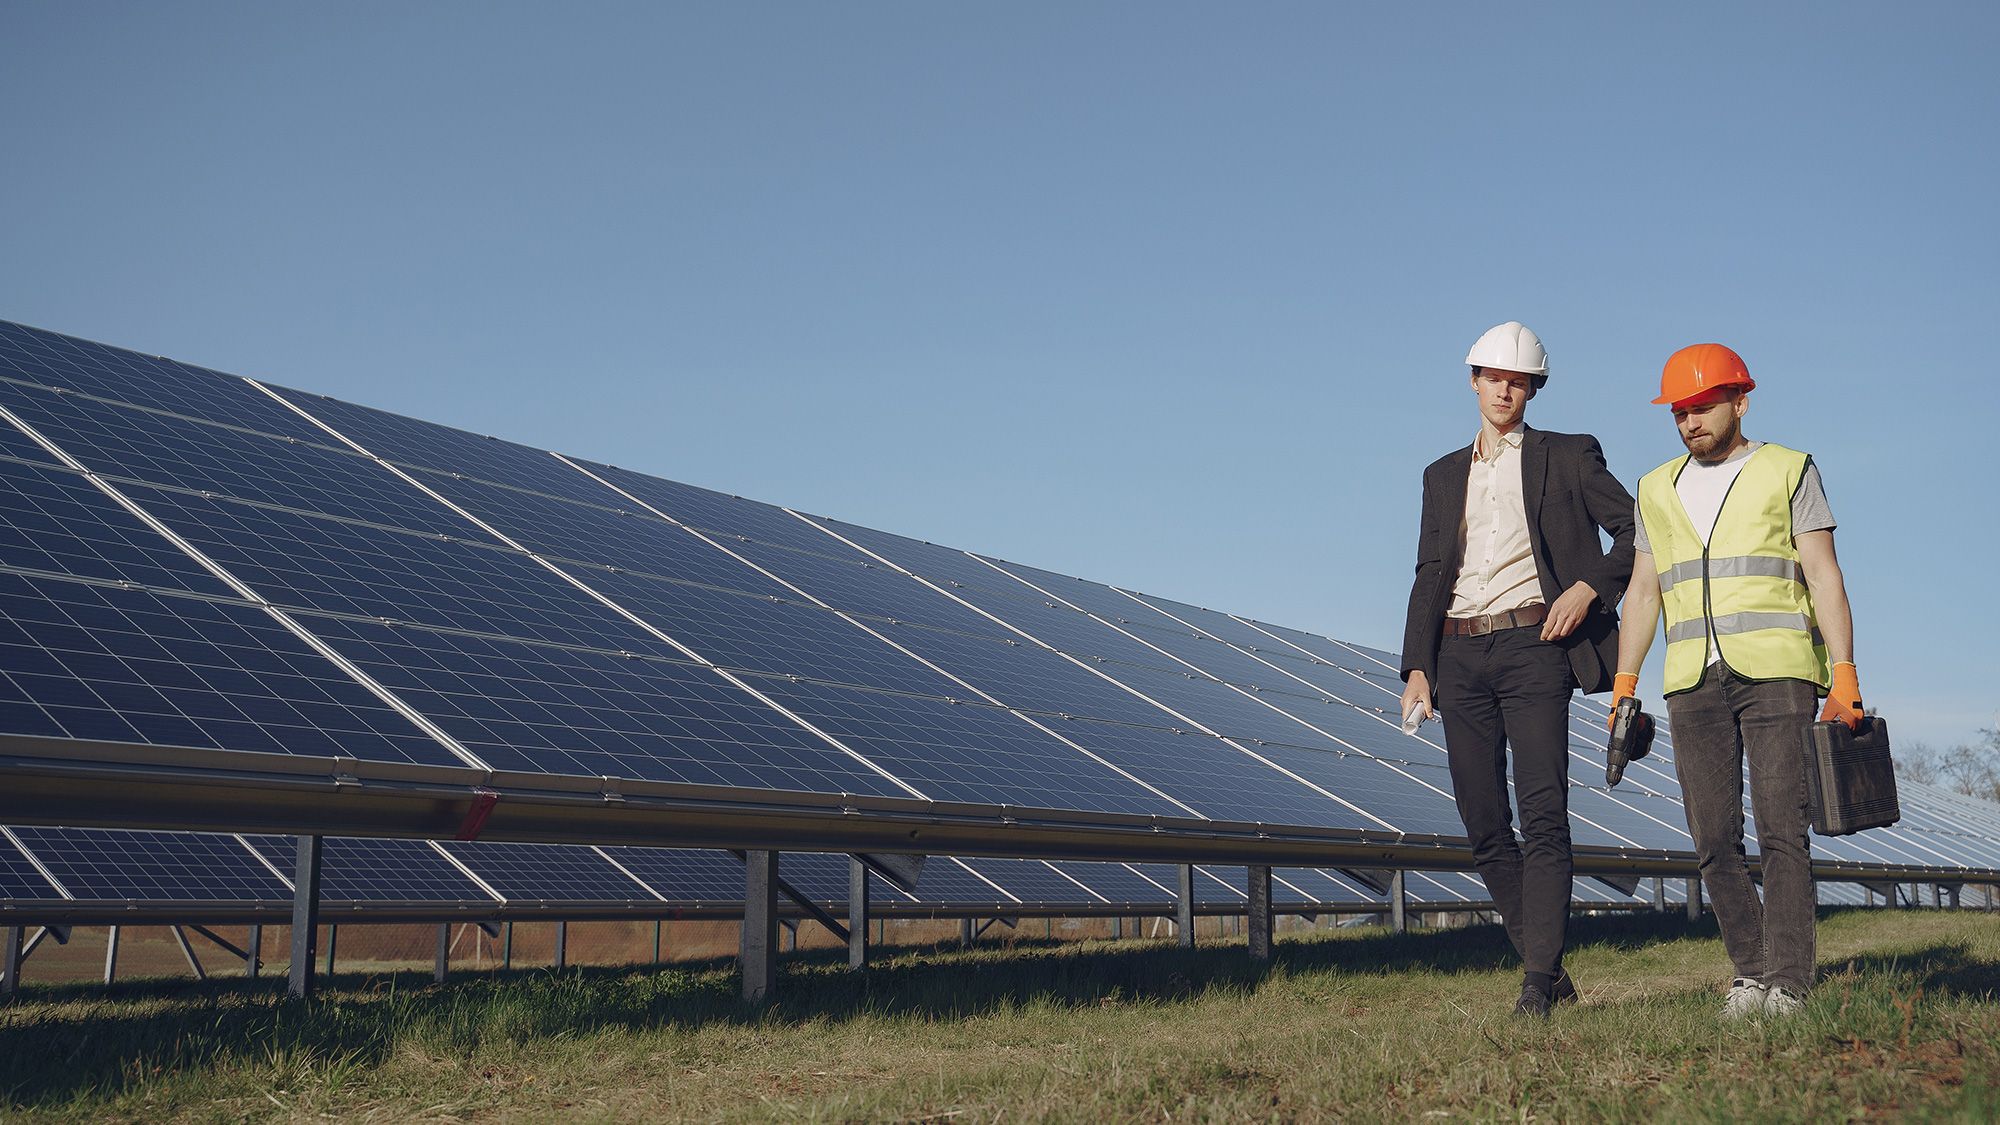 Solar farm engineer talking to a business owner with solar panels in the background